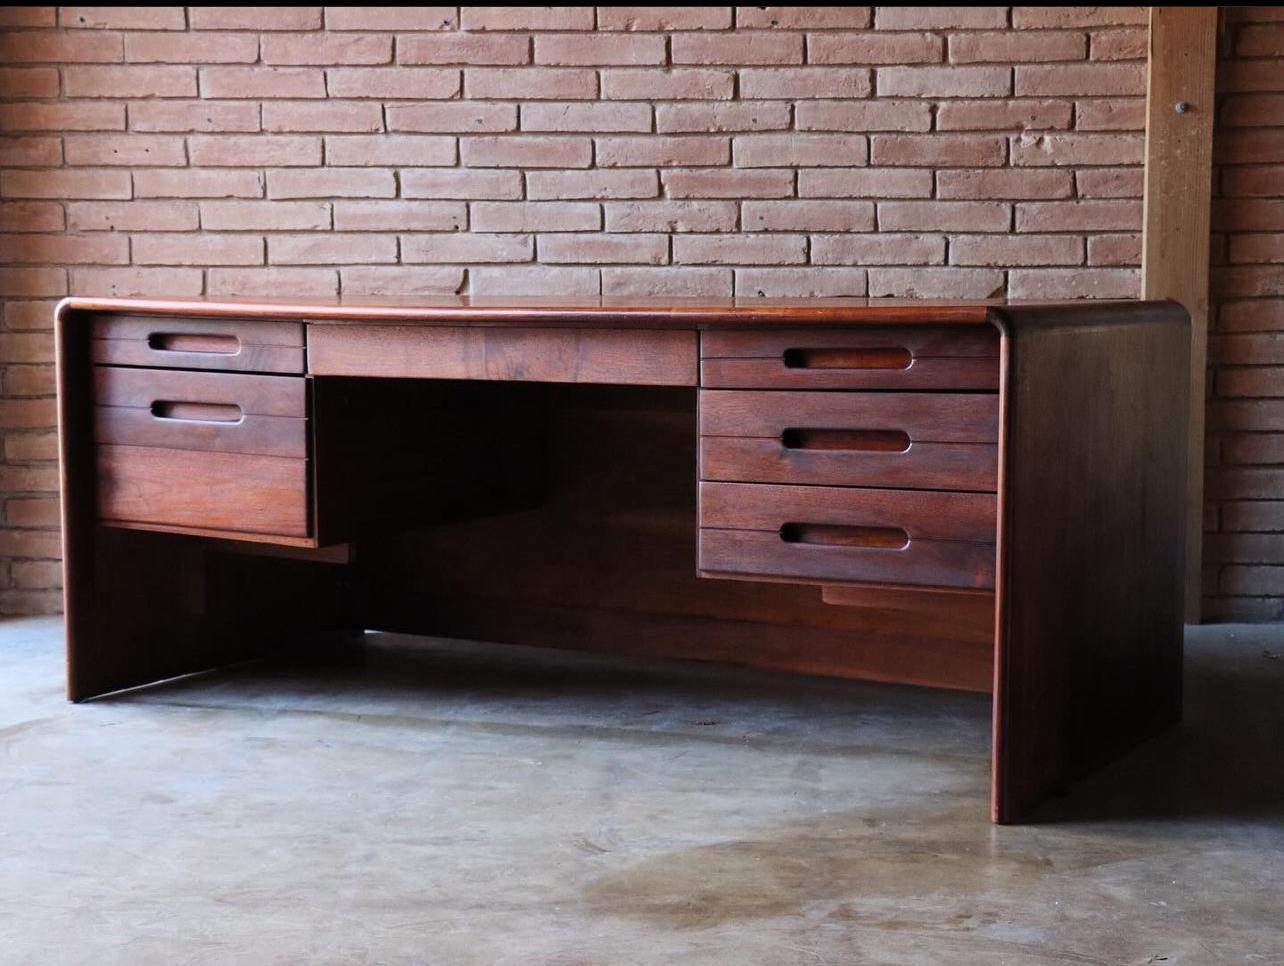 Beautiful solid walnut and olive Burlwood desk designed by Lou Hodges for California Design Group, 1980

This uncommon desk is a perfect example when form meets function. The solid walnut front and top is rich in color while the backside of the